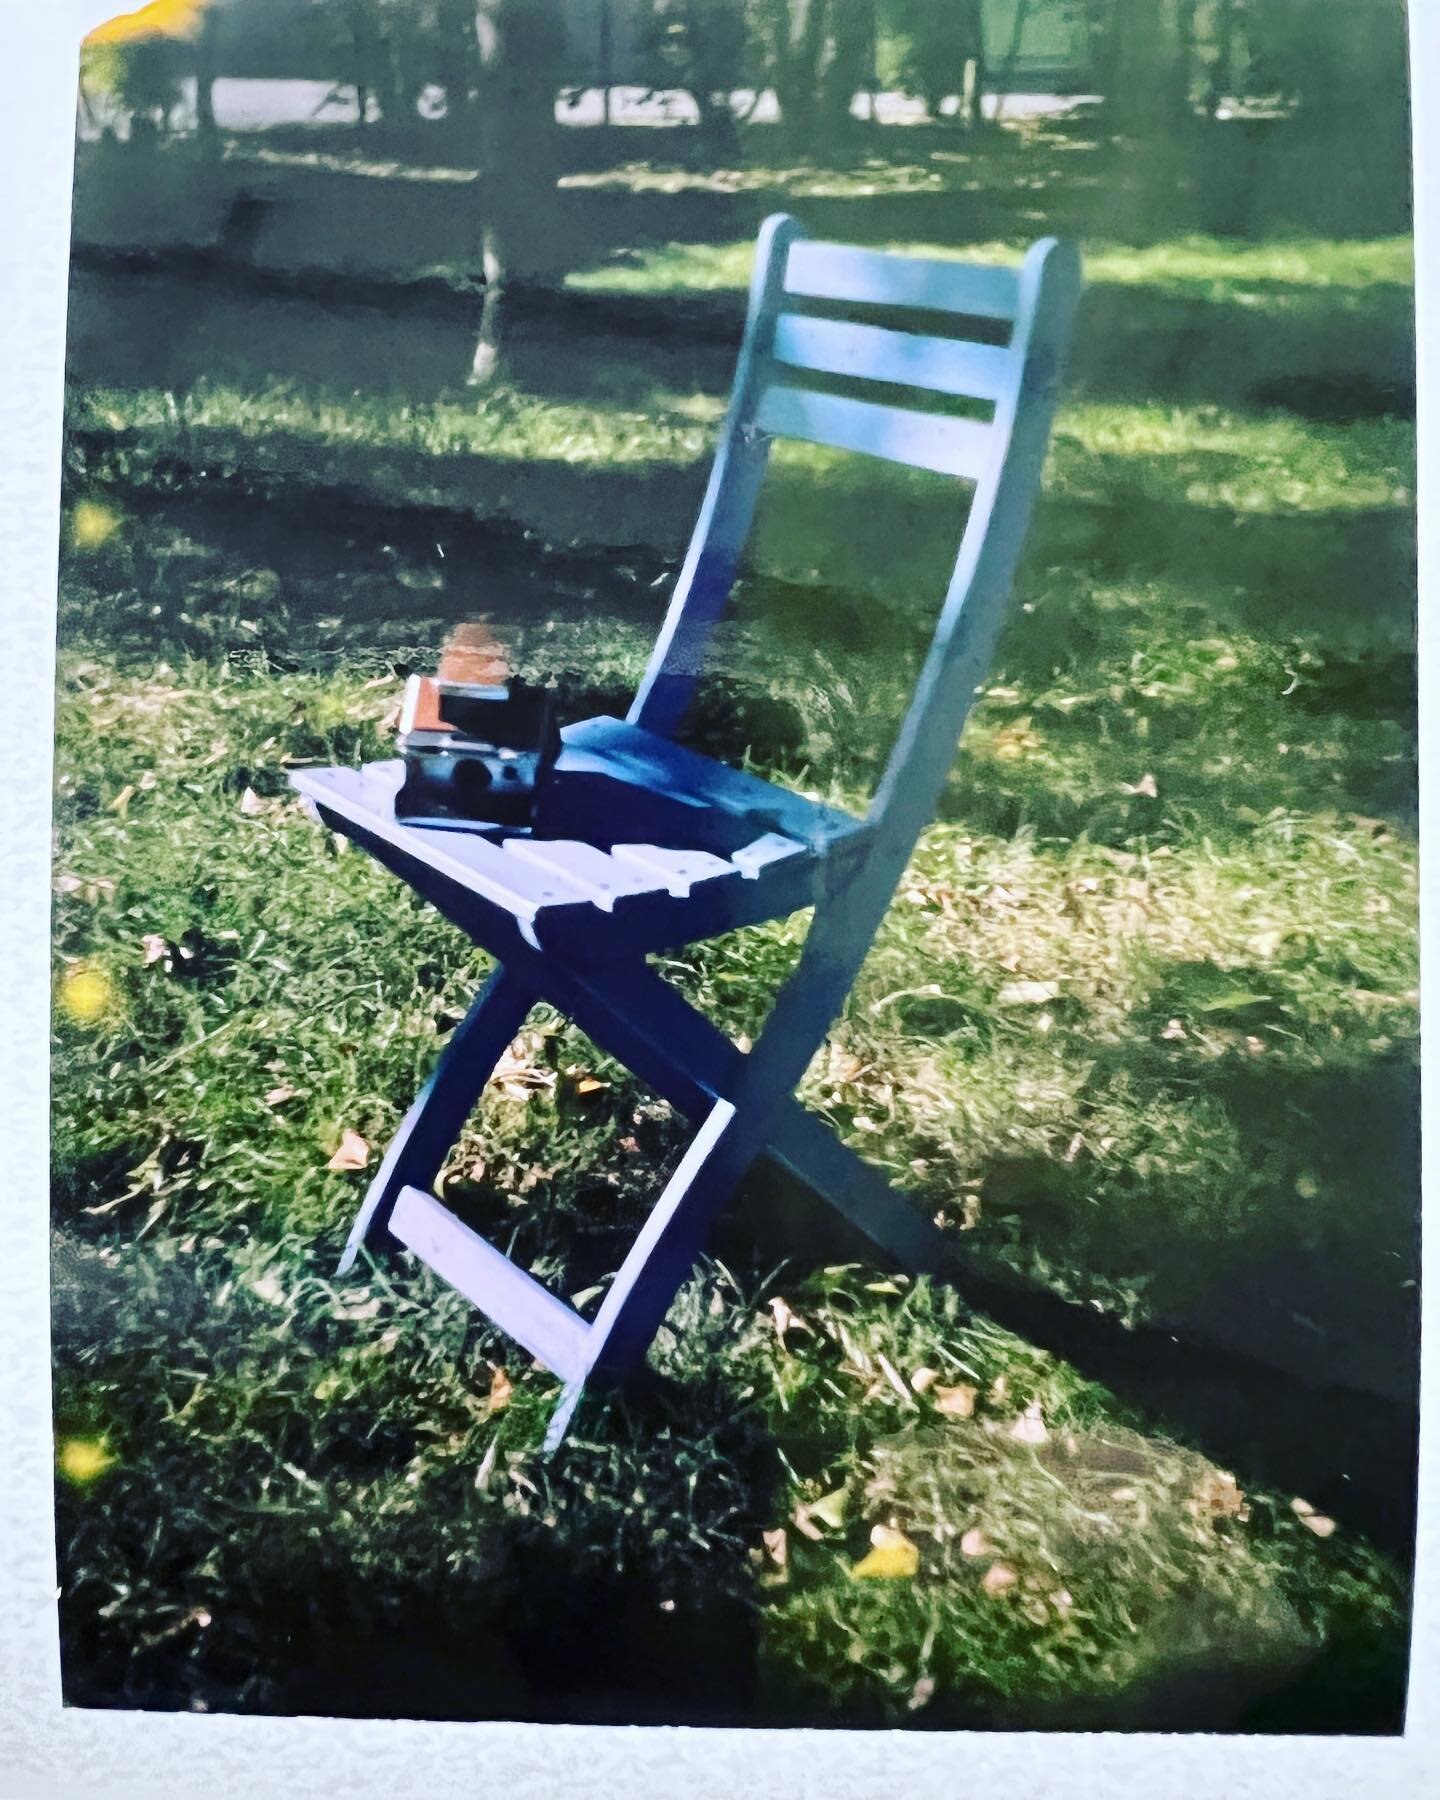 Blue chair
plus SX-70
a shot with a Polaroid EE 100
camera, found in my studio archive 😉,
analog fun, this film is over 10 years old, looks like a digital filter.
.
.
#analogphotography #analog #polaroid #sofortbildkamera #sx70 #sx70polaroid #fudjif